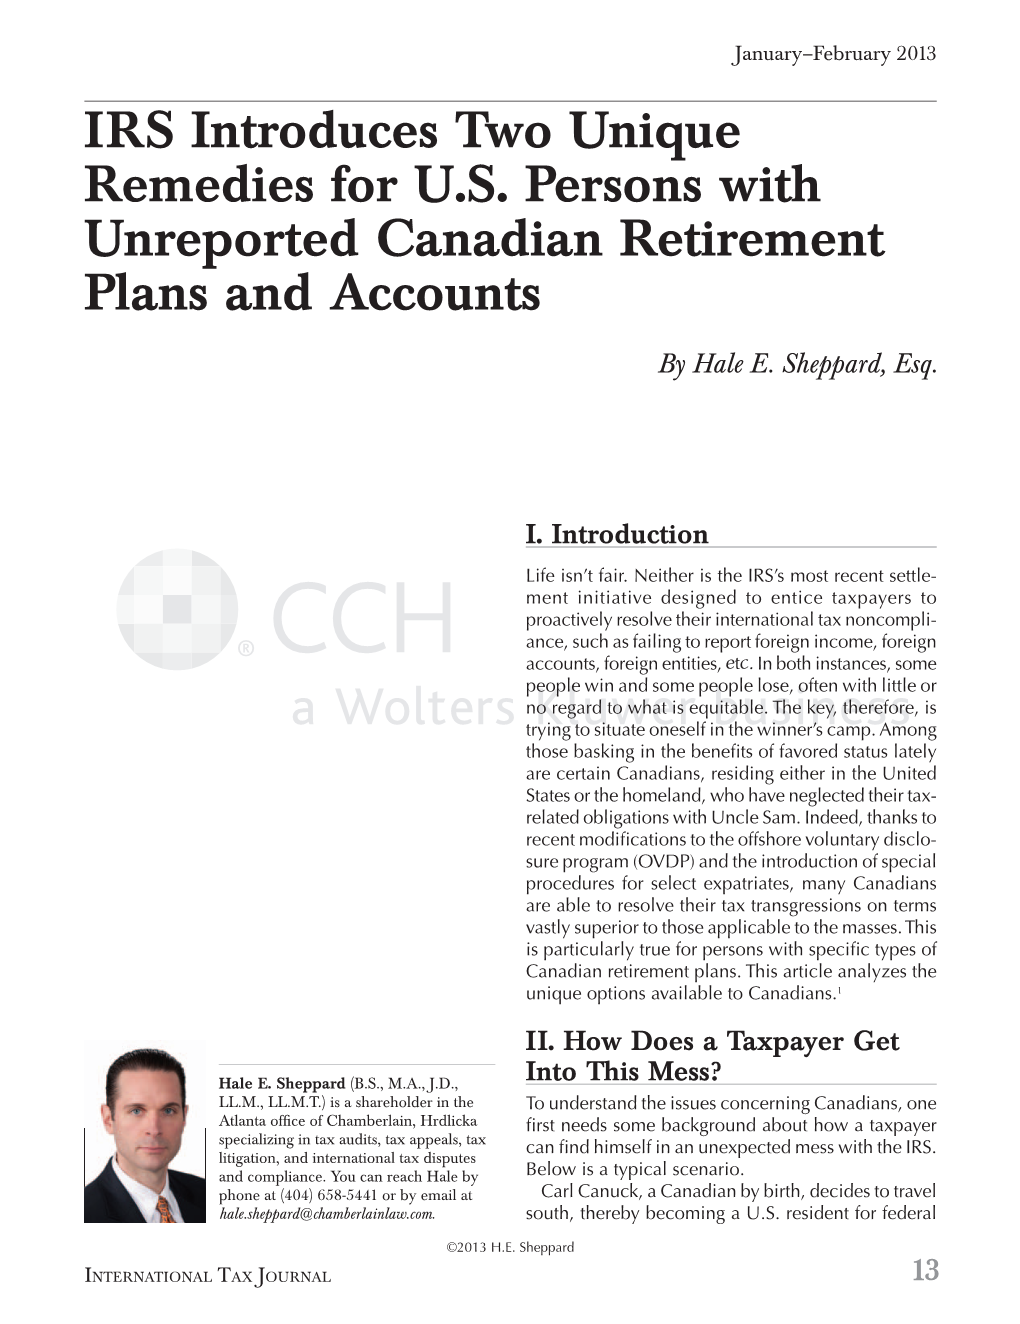 IRS Introduces Two Unique Remedies for U.S. Persons with Unreported Canadian Retirement Plans and Accounts